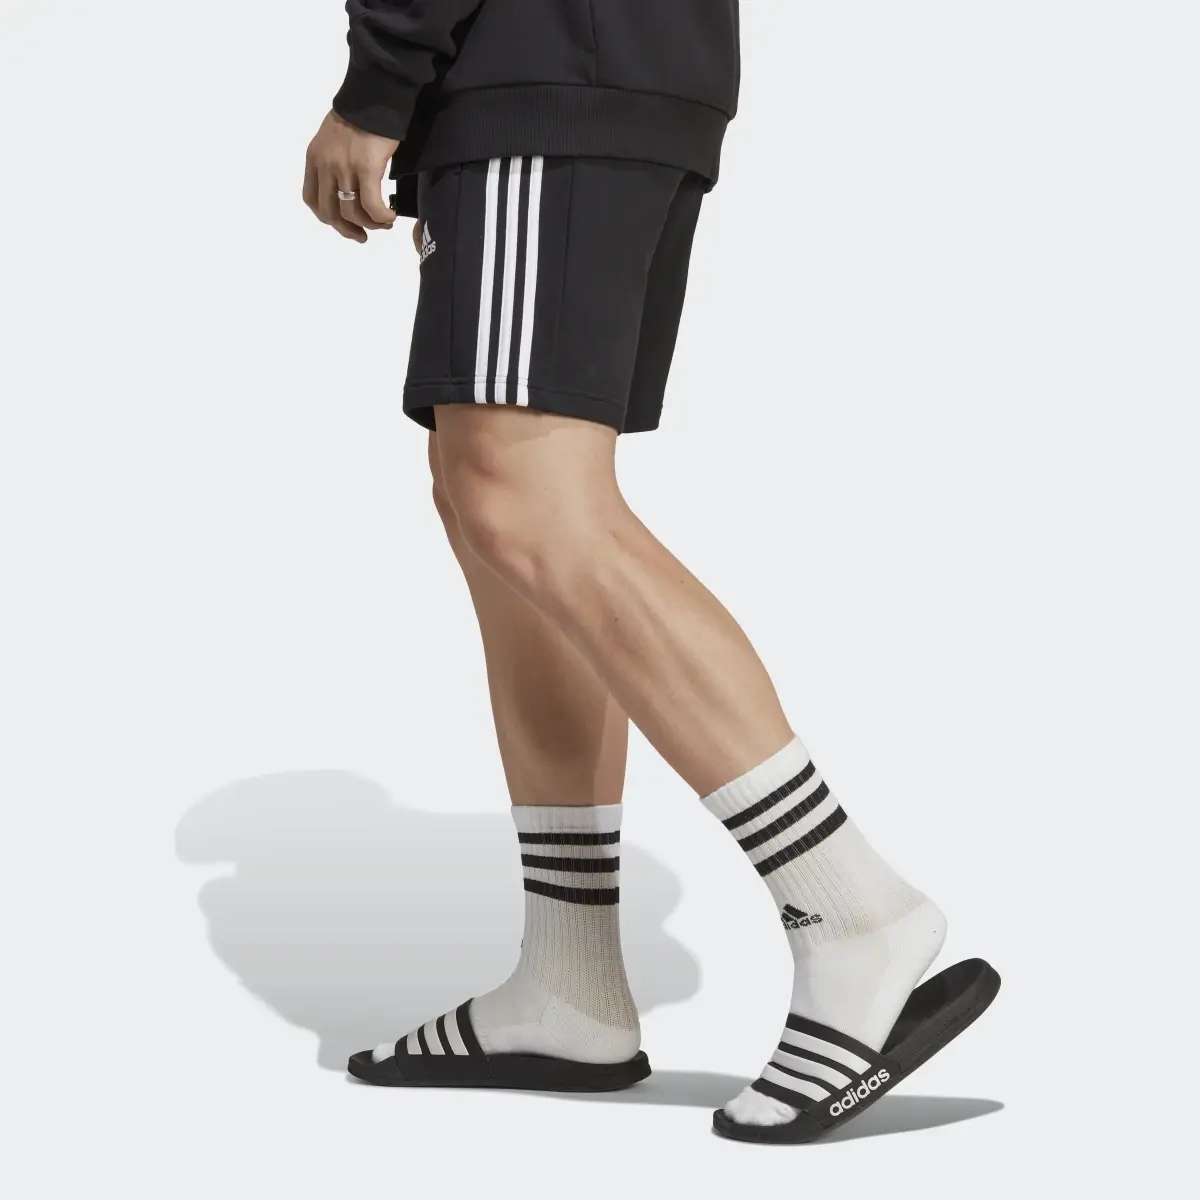 Adidas Essentials French Terry 3-Stripes Shorts. 2